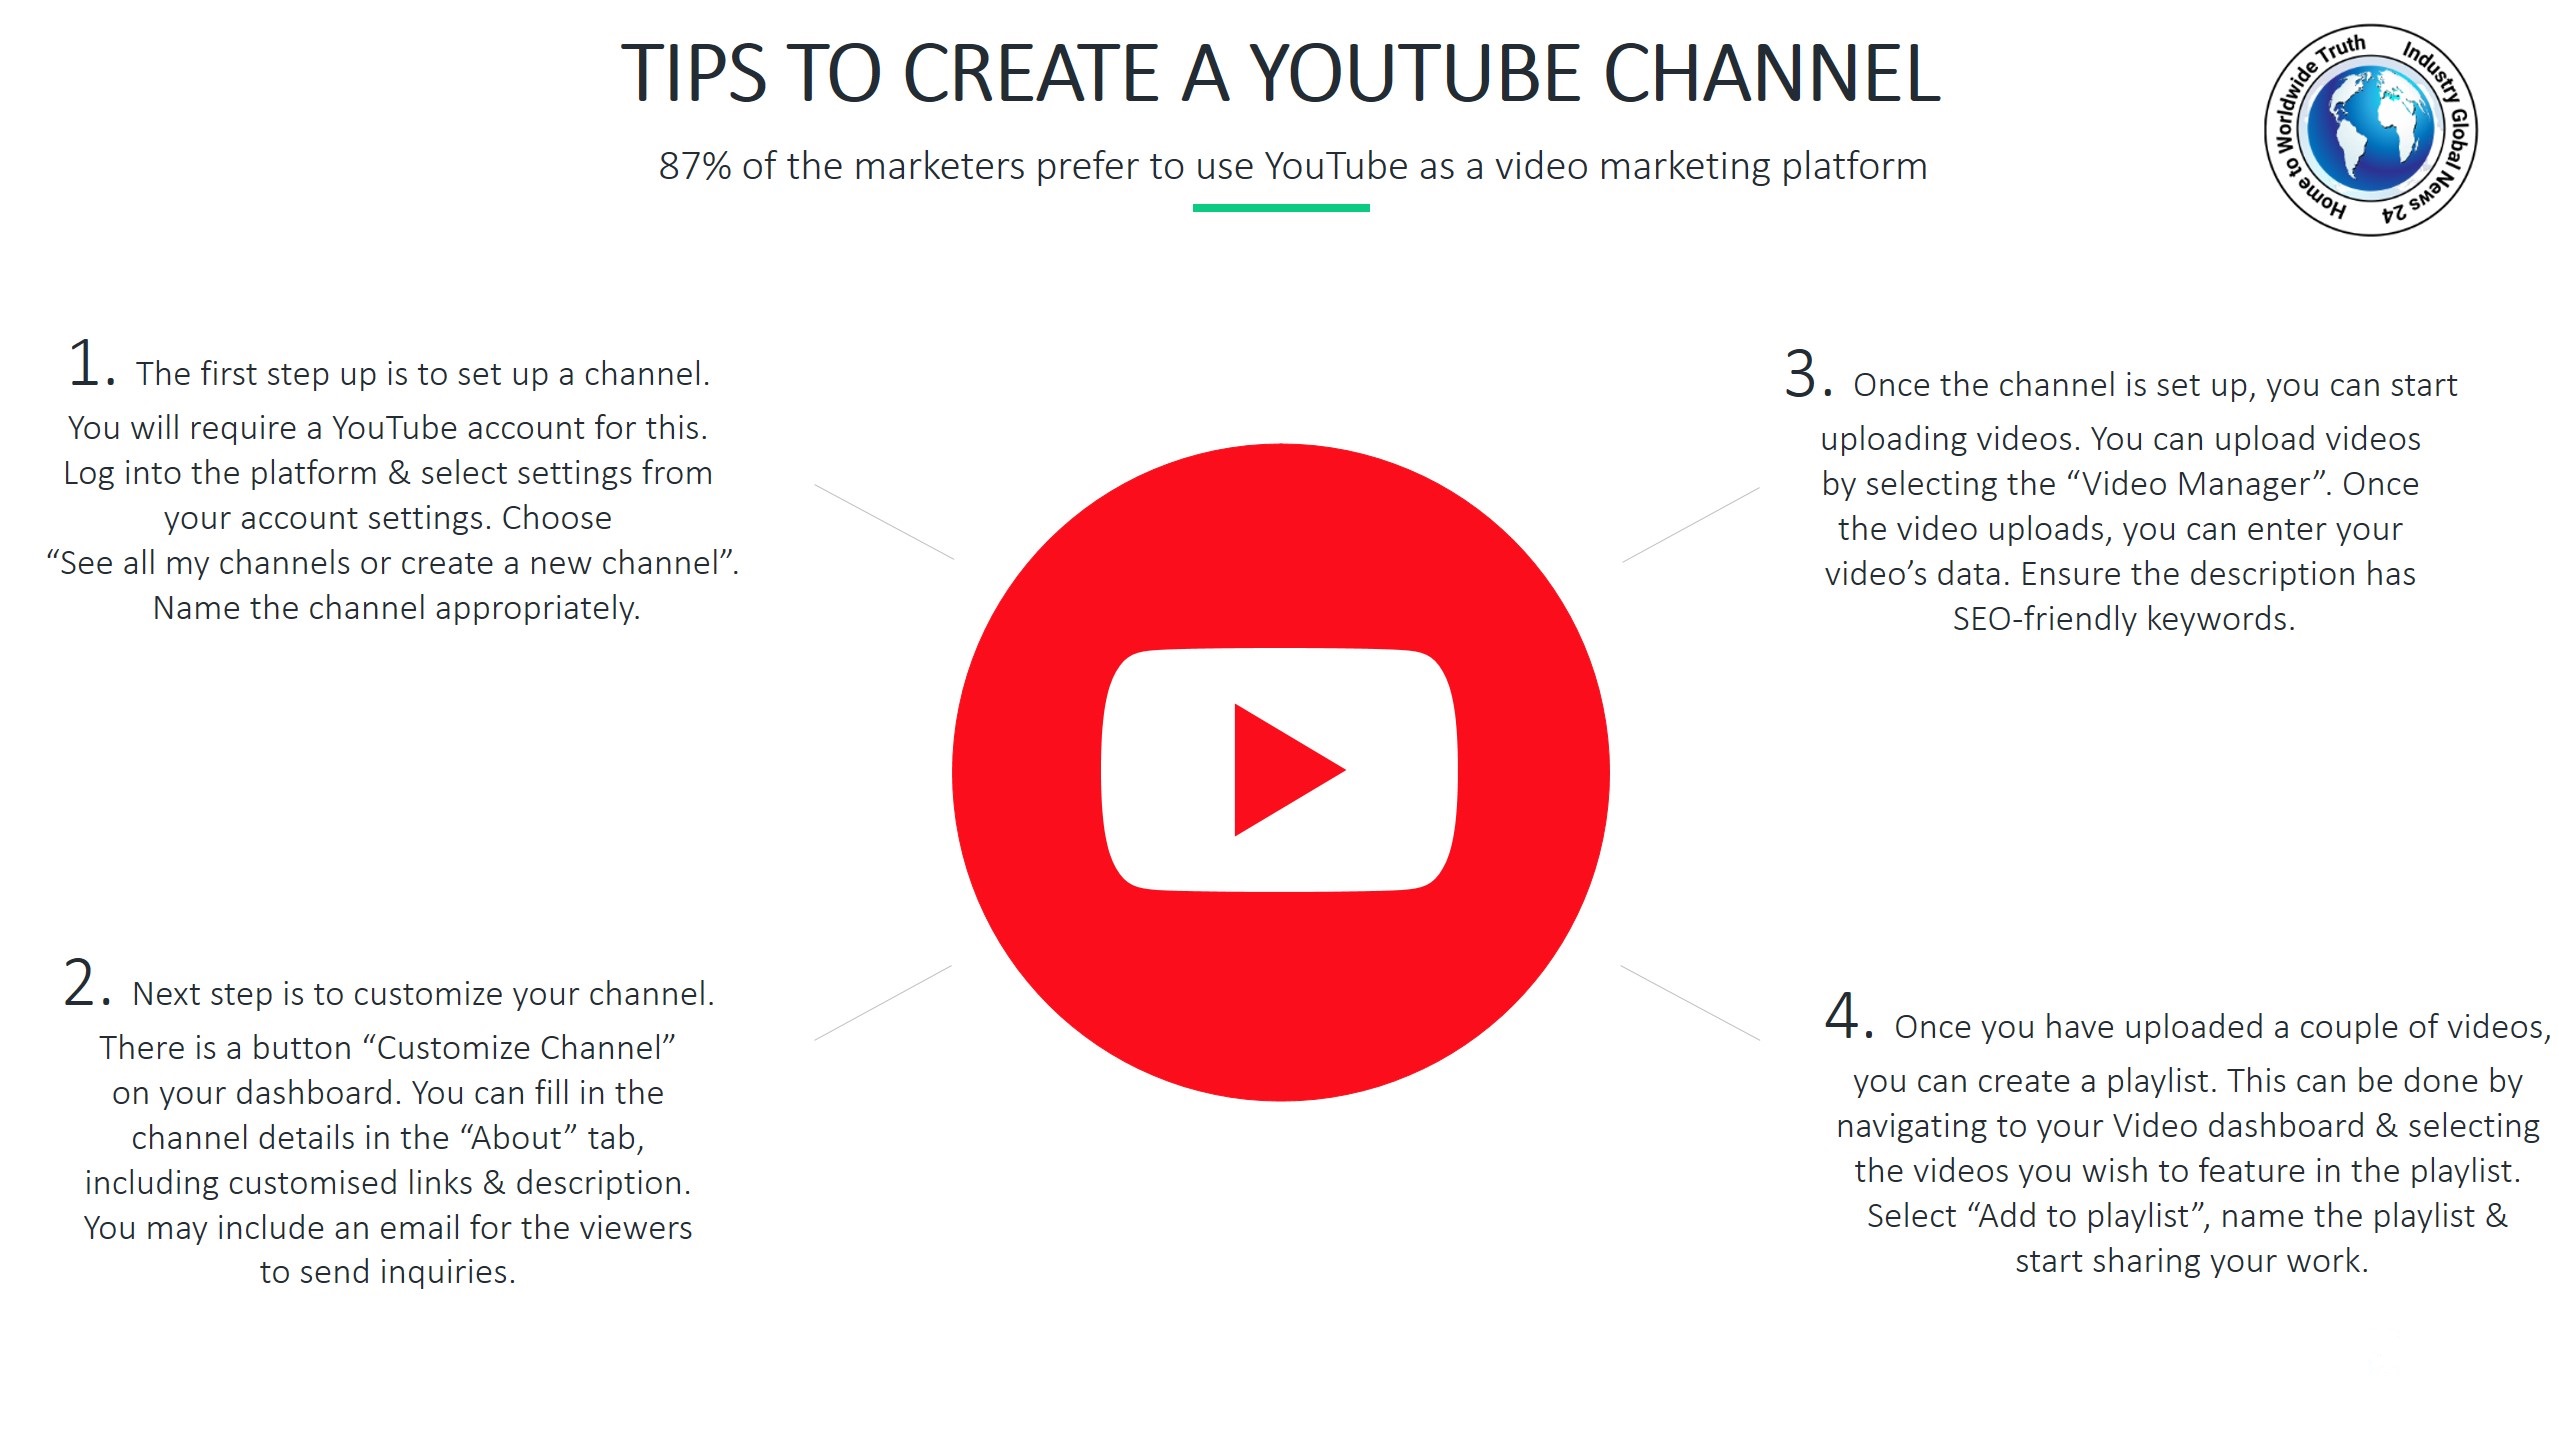 Tips to create a YouTube channel